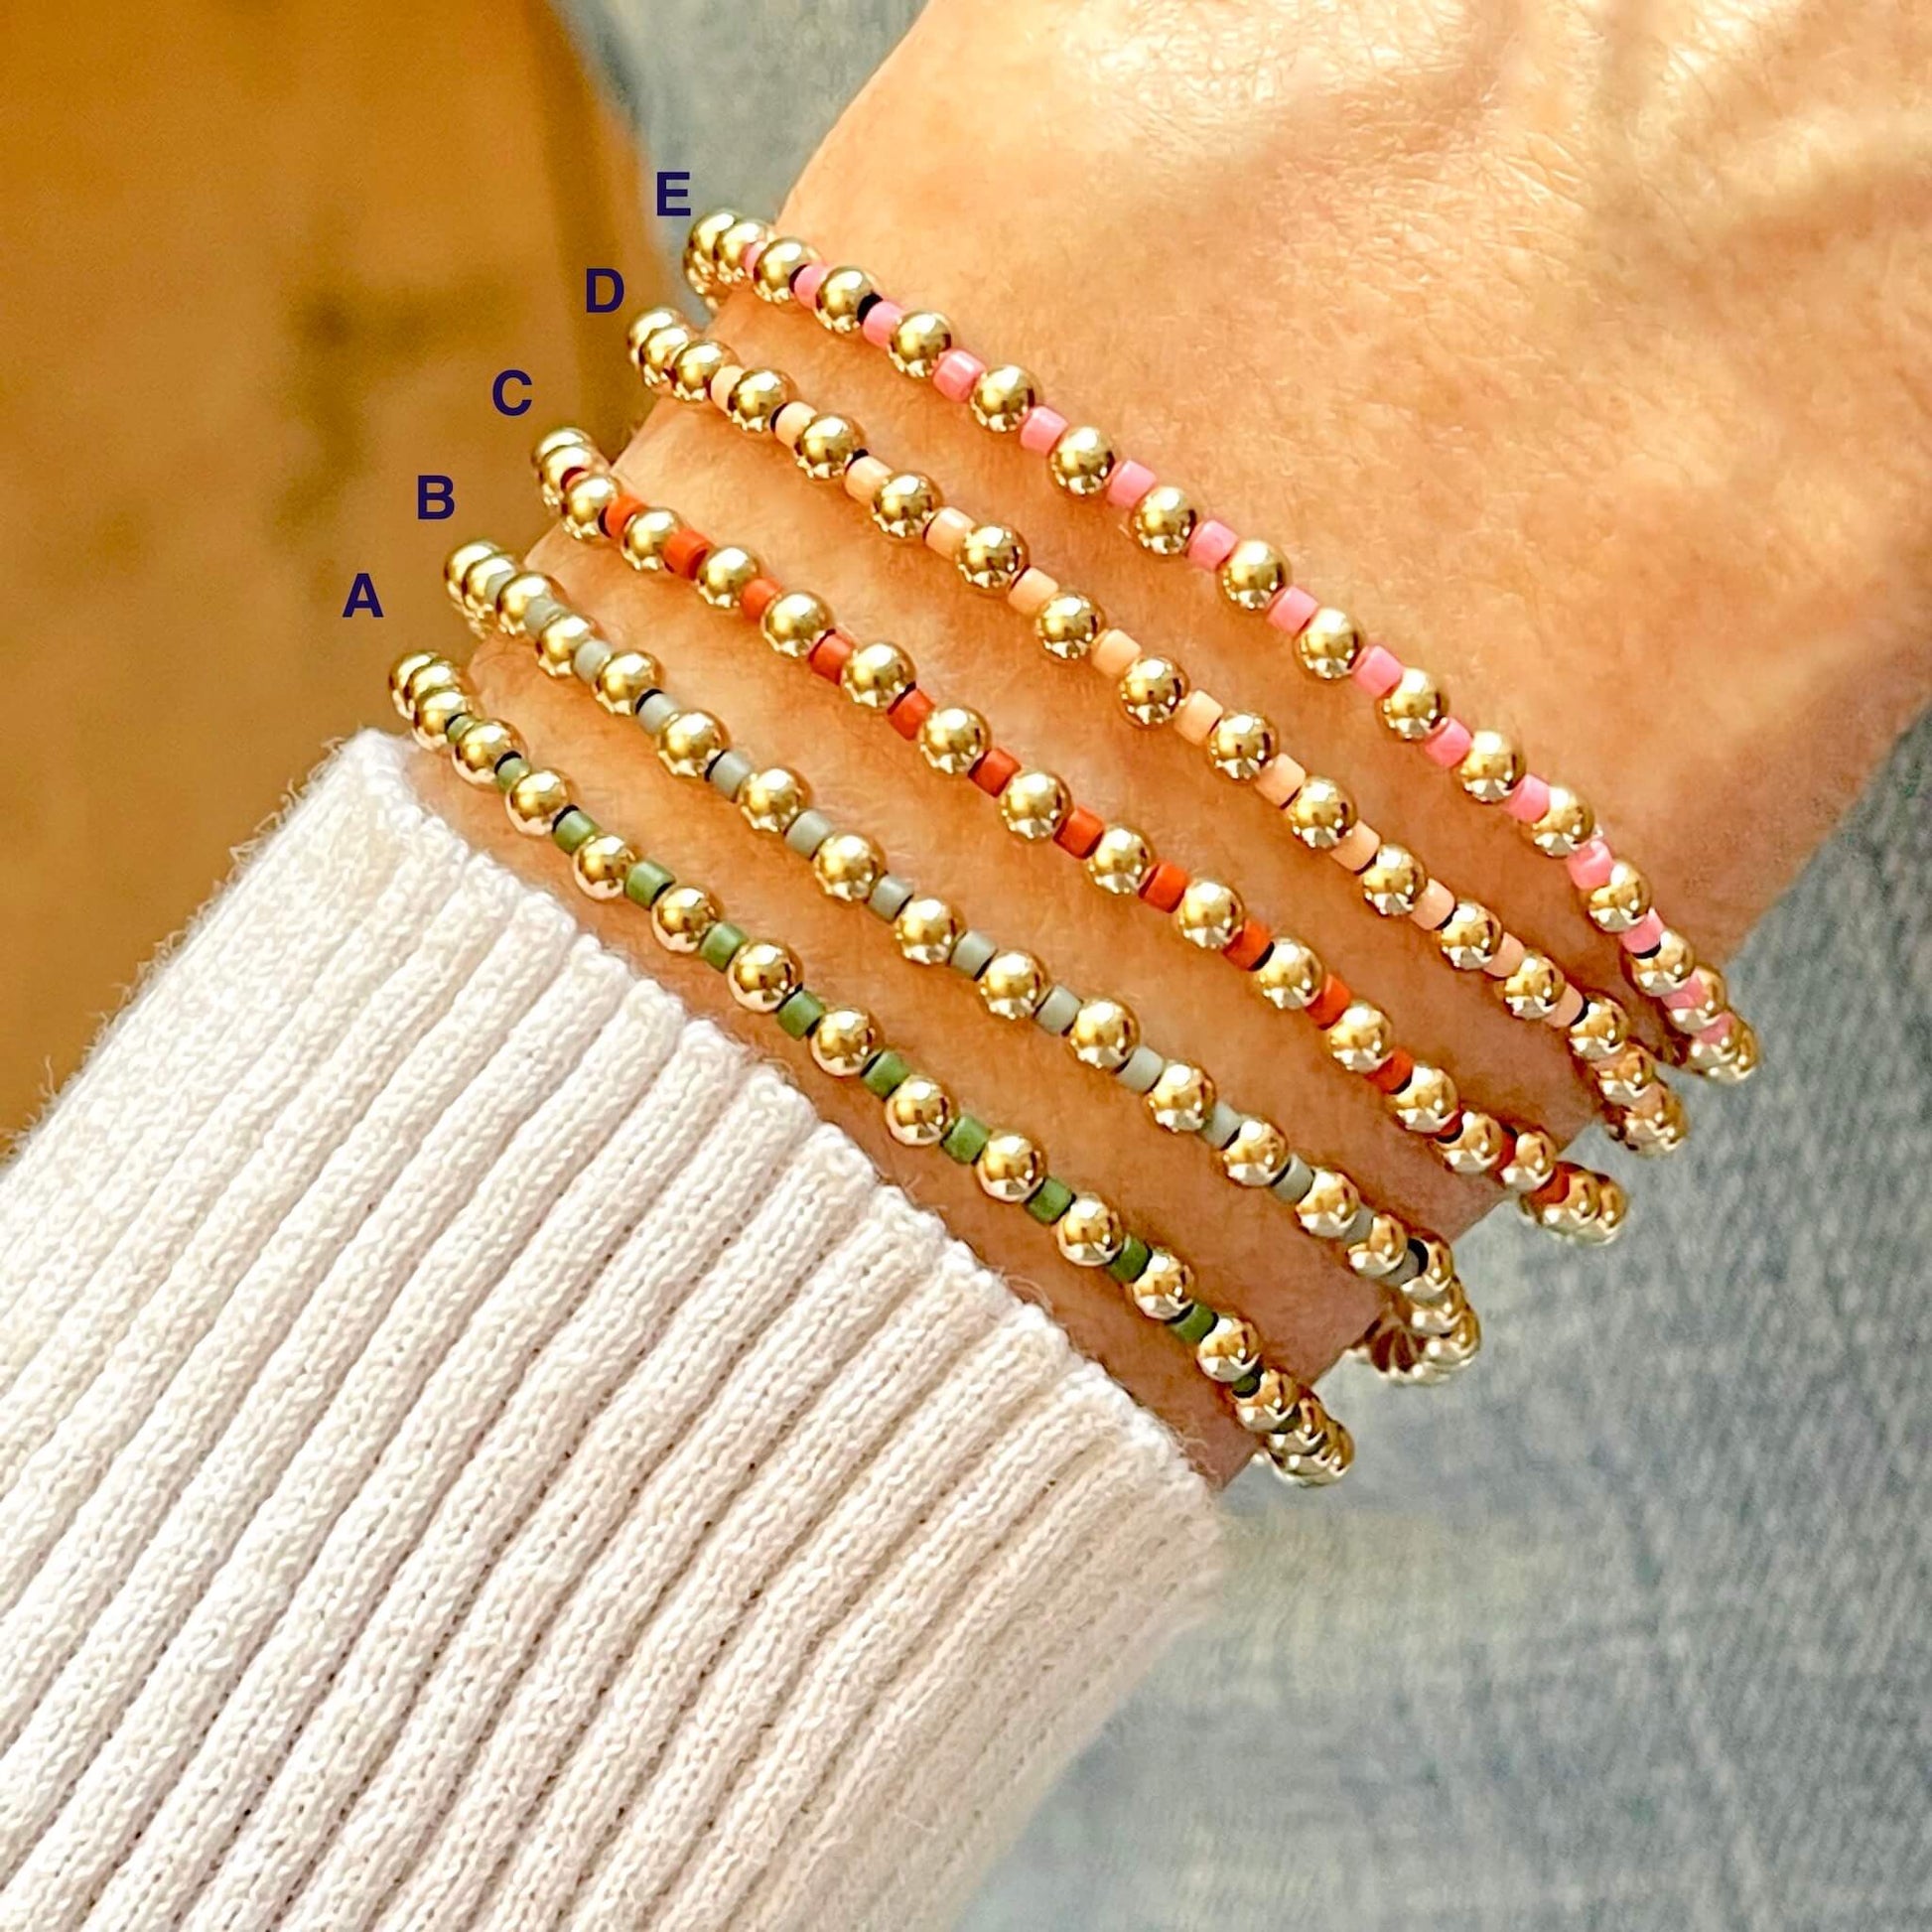 Women's gold bead bracelets with colorful seed beads on stretch cord. Handmade in NYC.